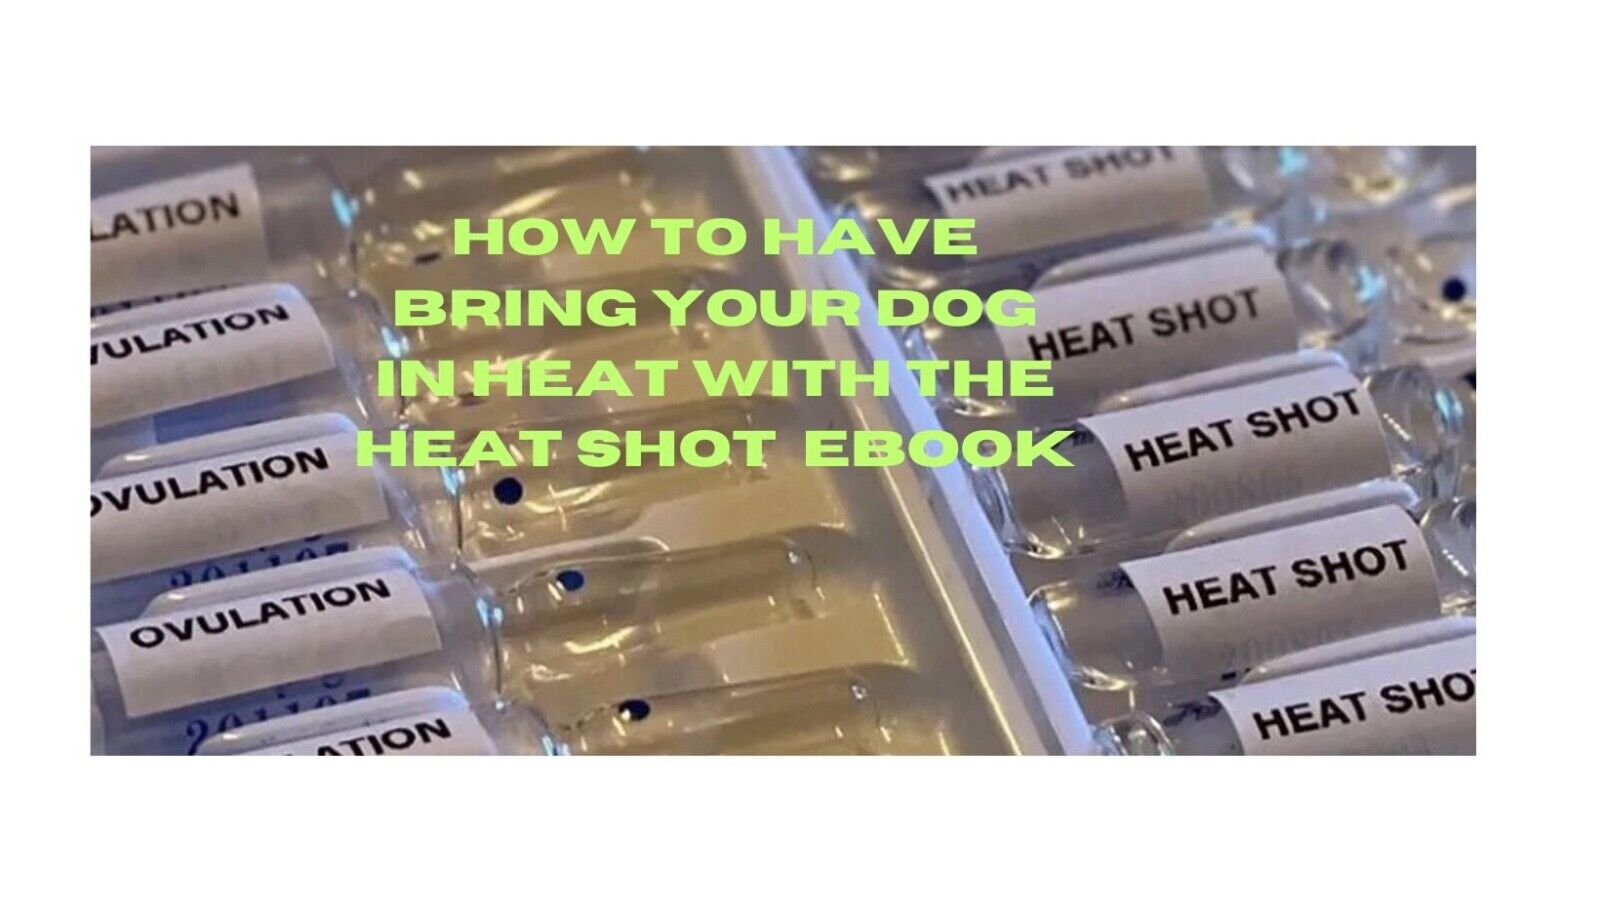 How to Bring Your Dog into Heat with Heat Shot ebook new